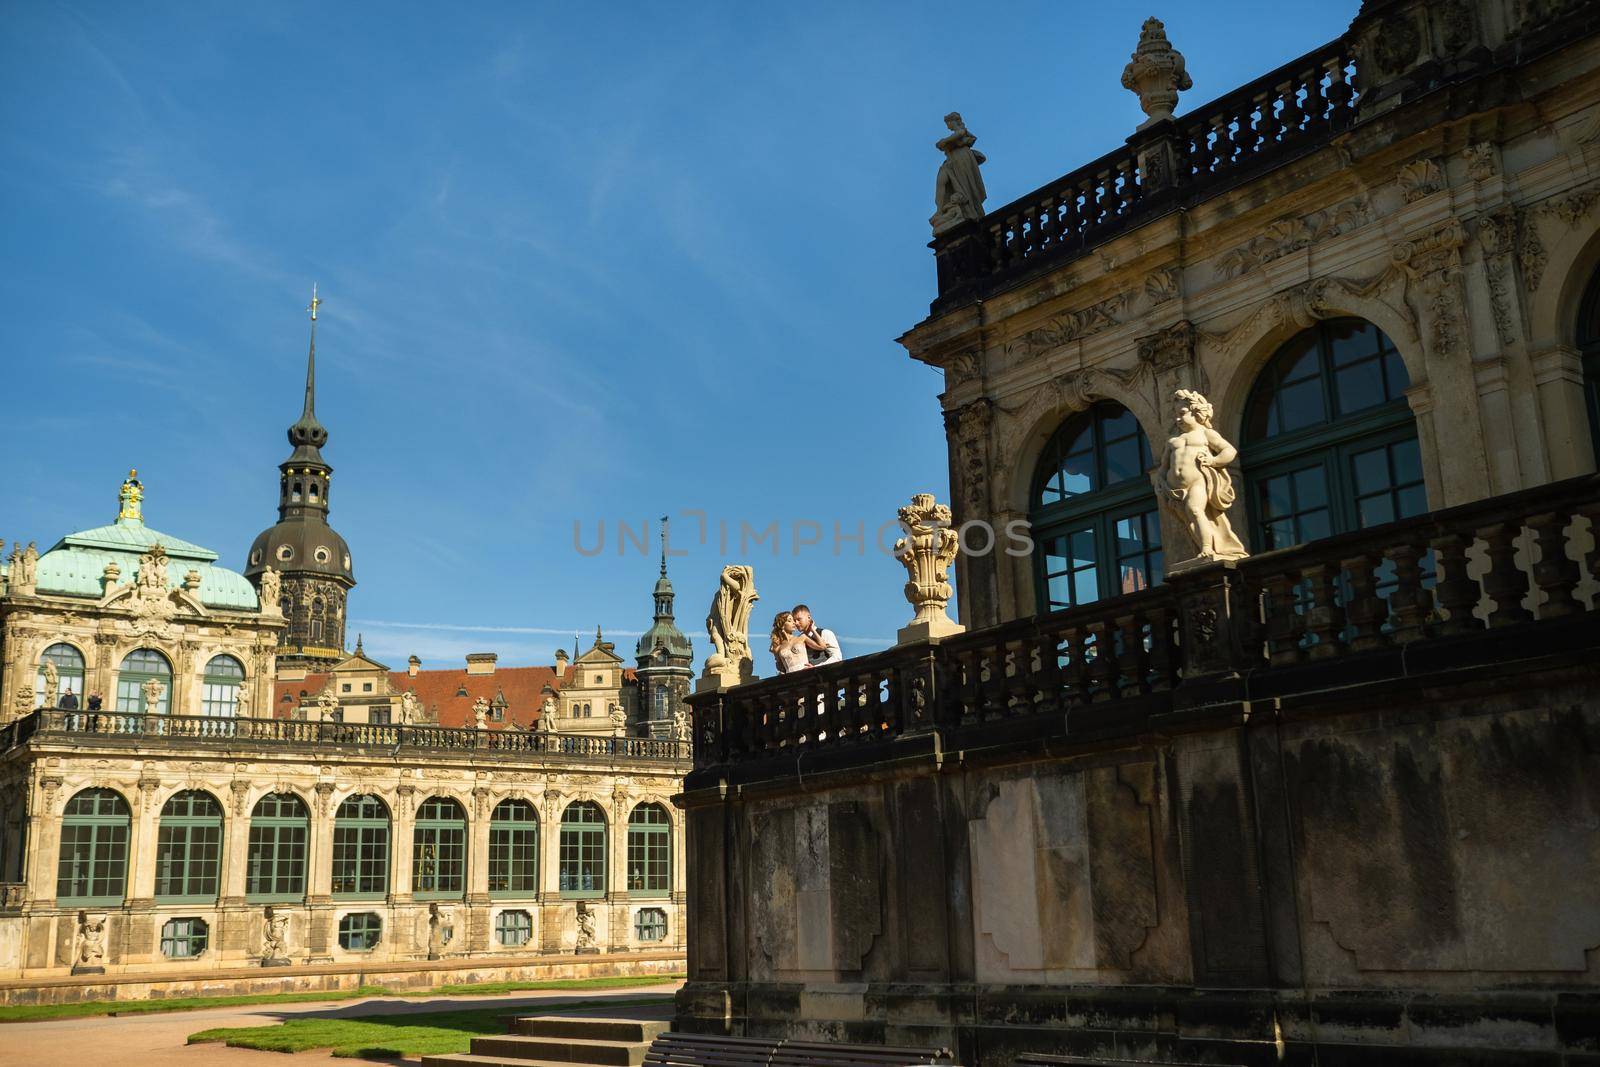 A couple in love on a wedding walk at the famous Baroque Zwinger Palace in Dresden, Saxony, Germany by Lobachad